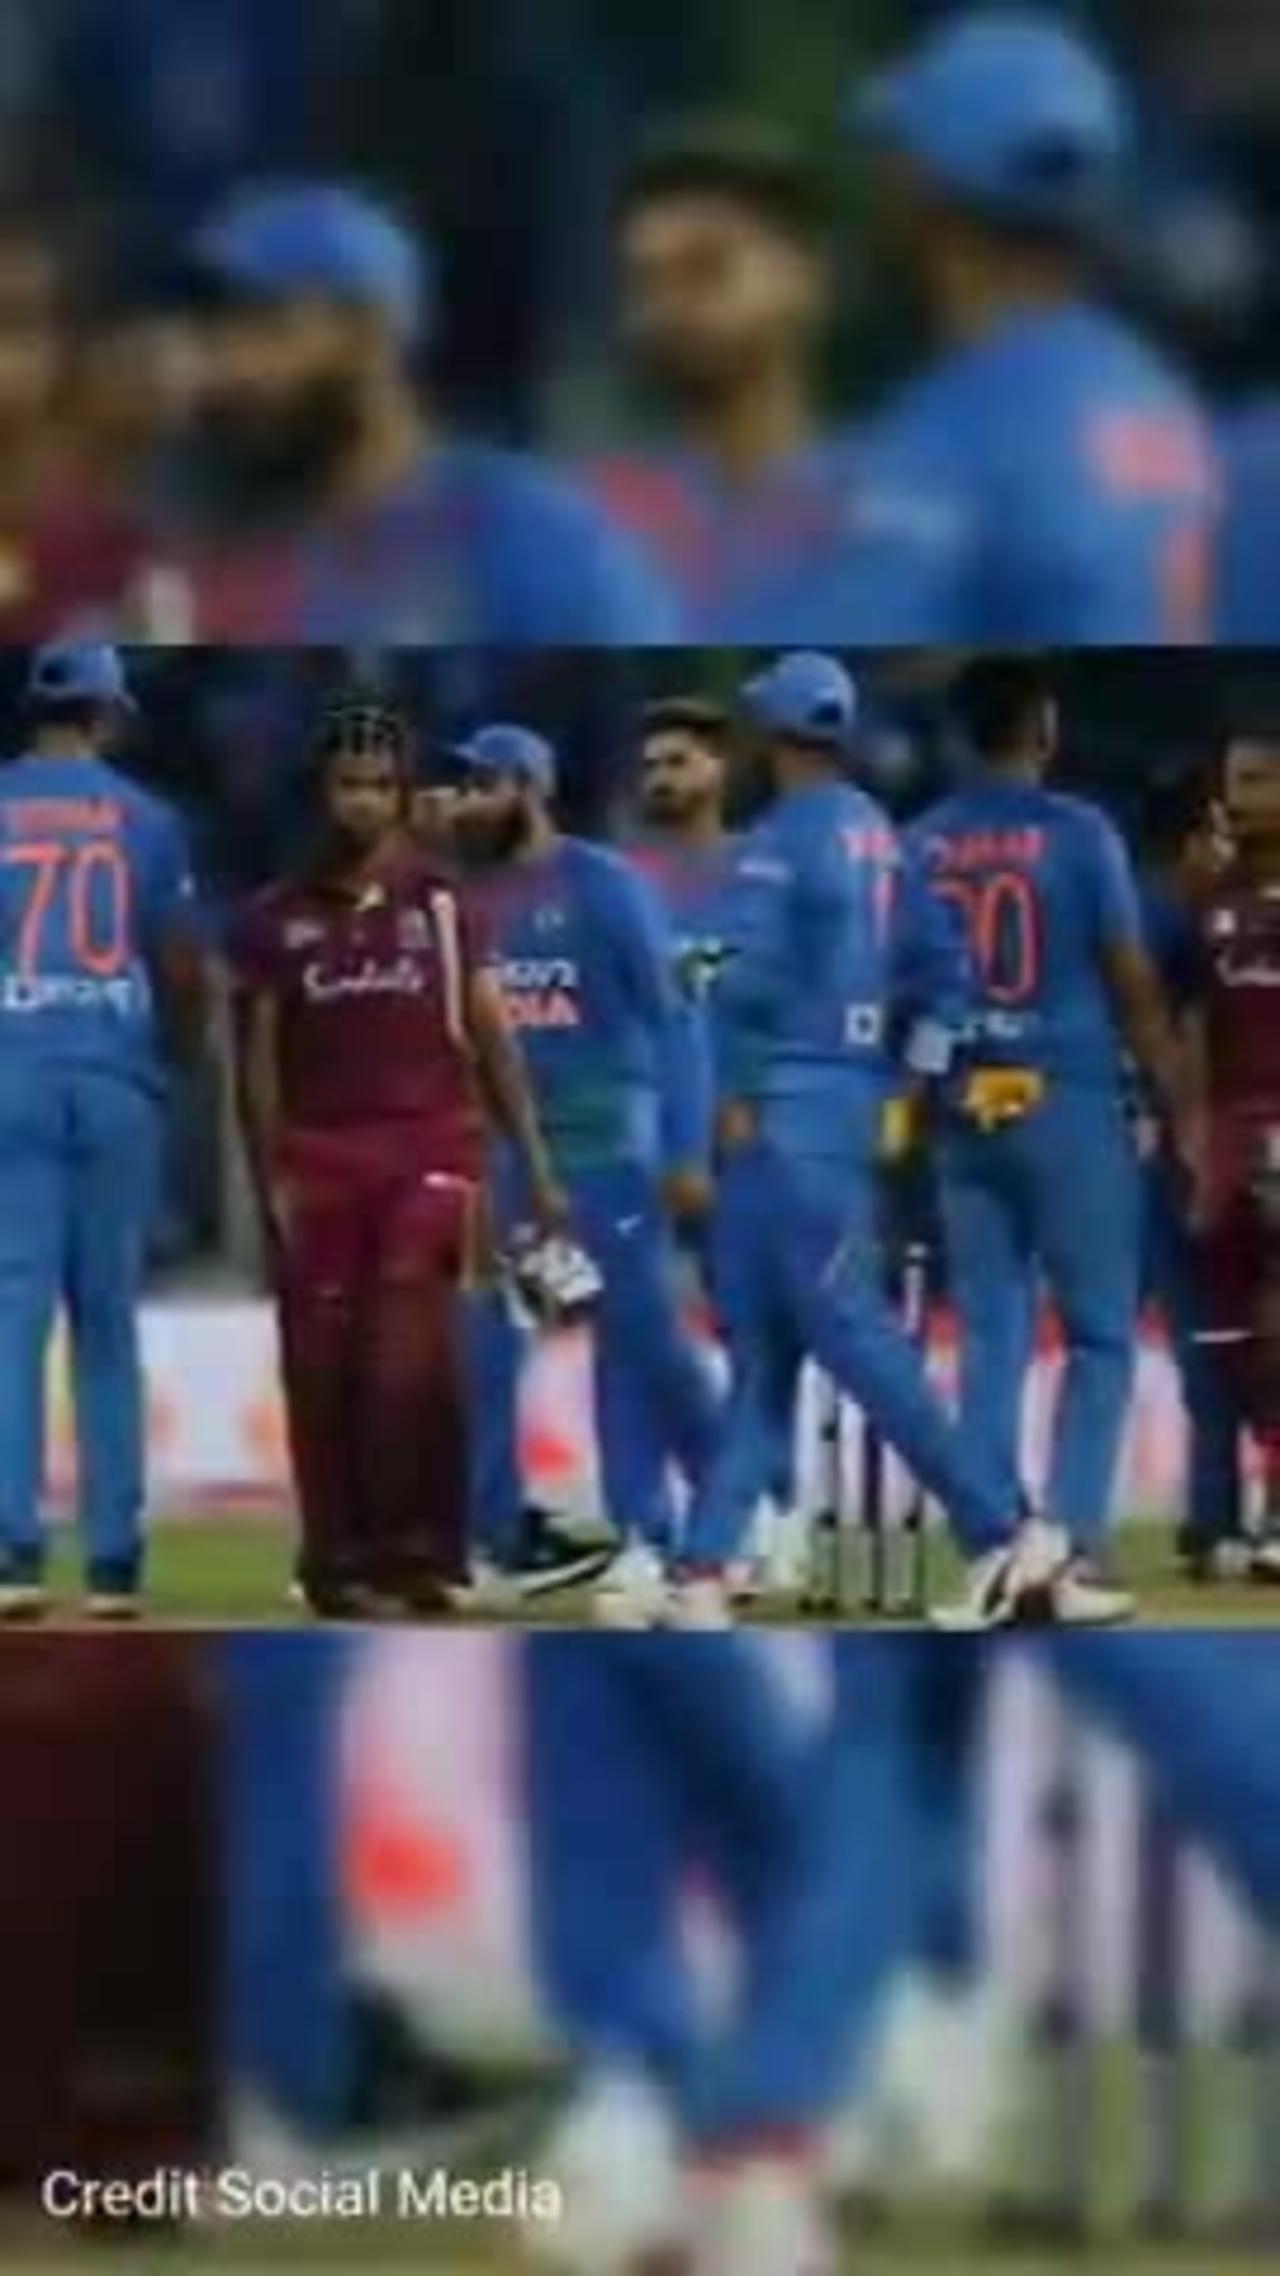 India vs West Indies 2nd T20 Match time changed_batch